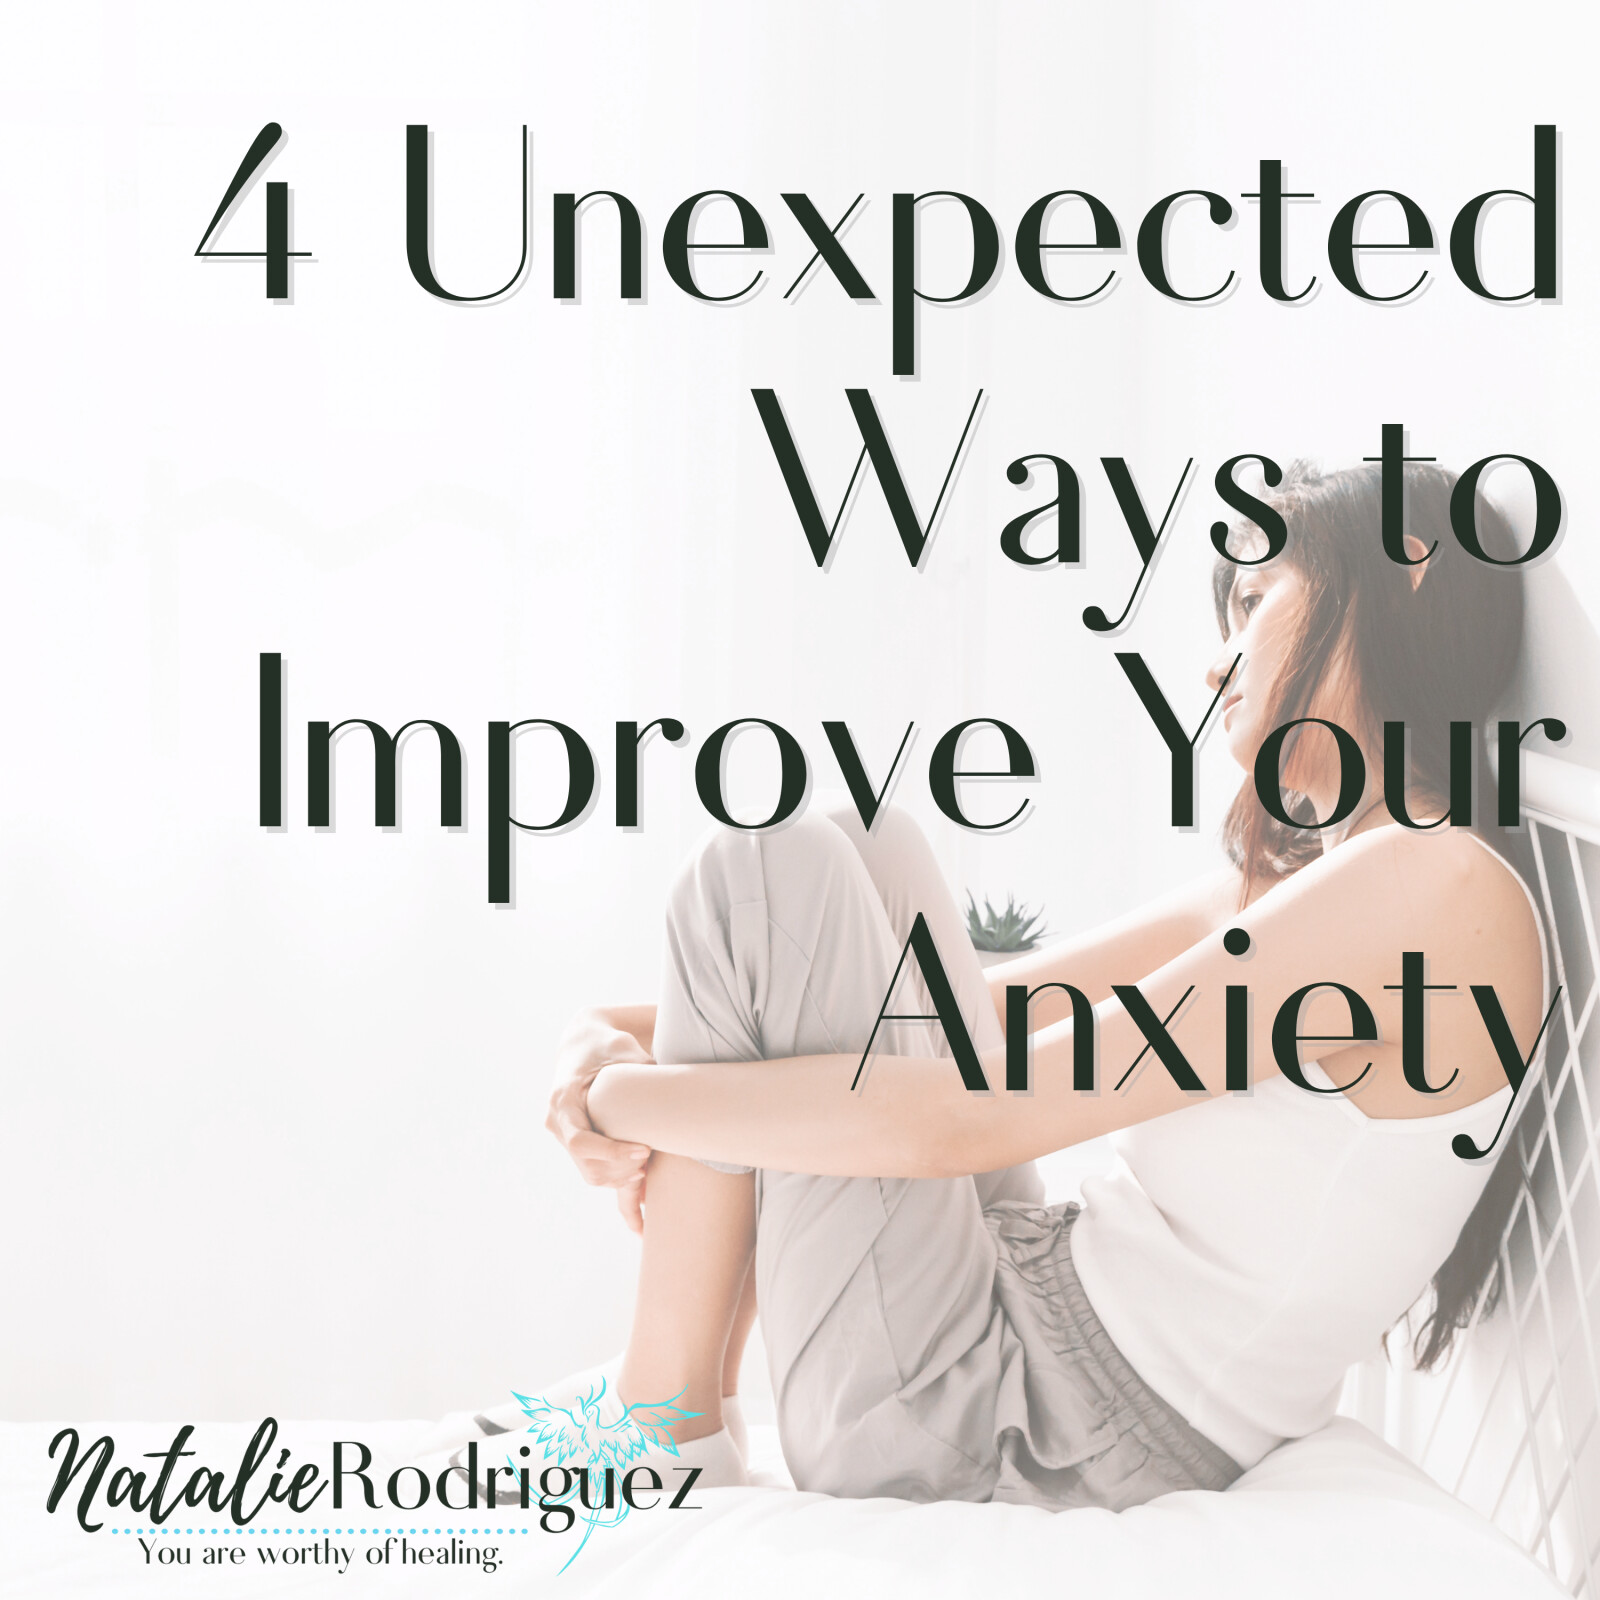 4 Unexpected Ways to Improve Anxiety - Part 2